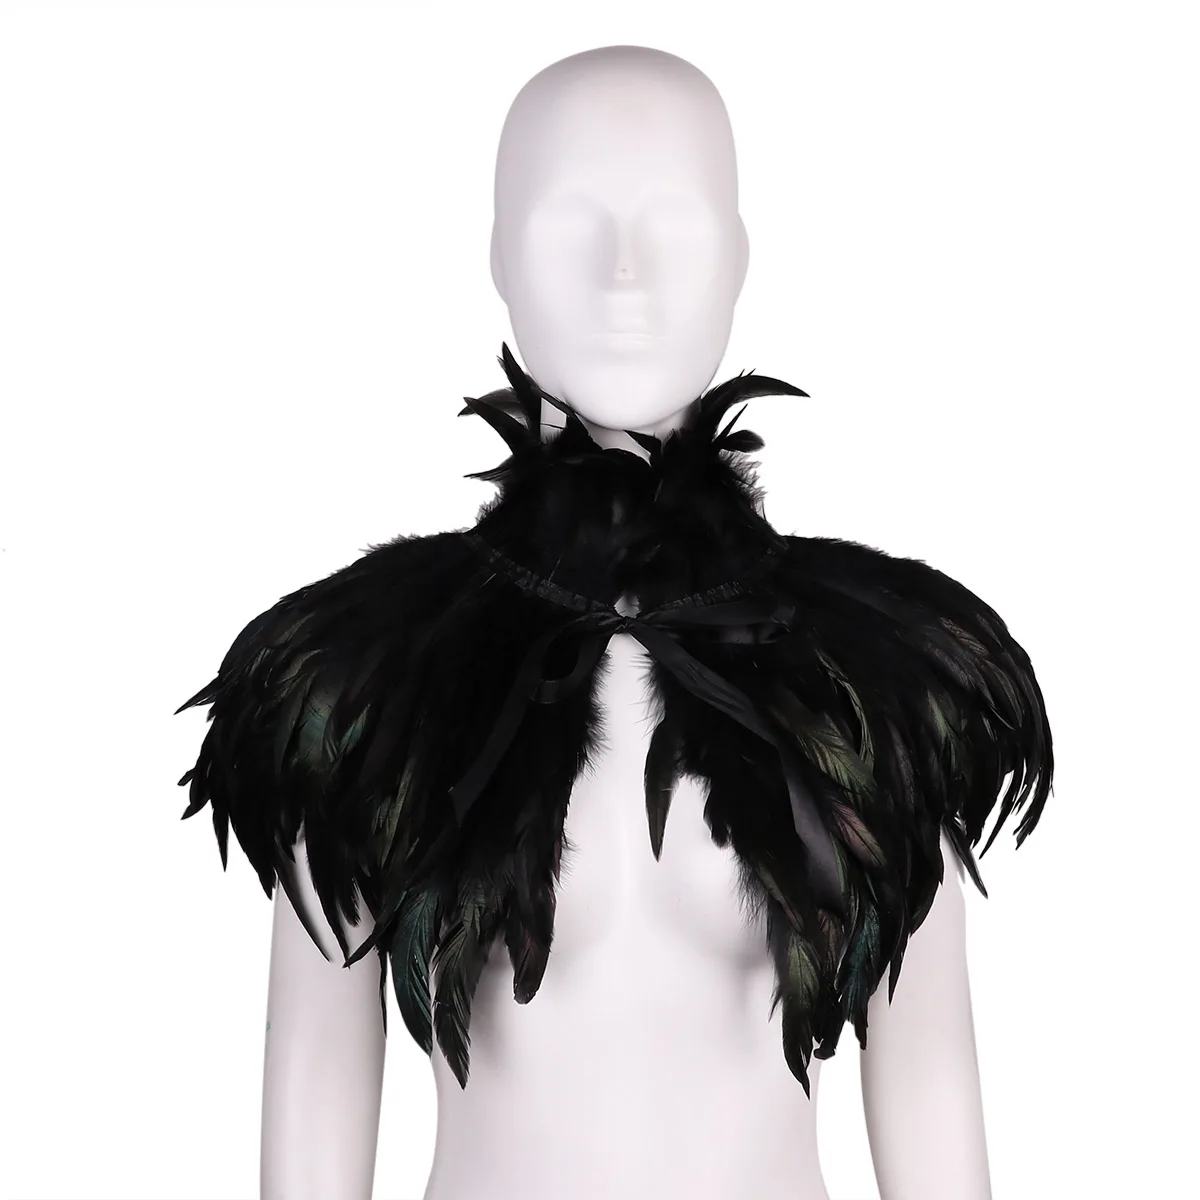 

Black Natural Feather Shoulder Cape Gothic Victorian Shawl Stole Poncho Halloween Cosplay Shrug Wrap Costume with Choker Collar